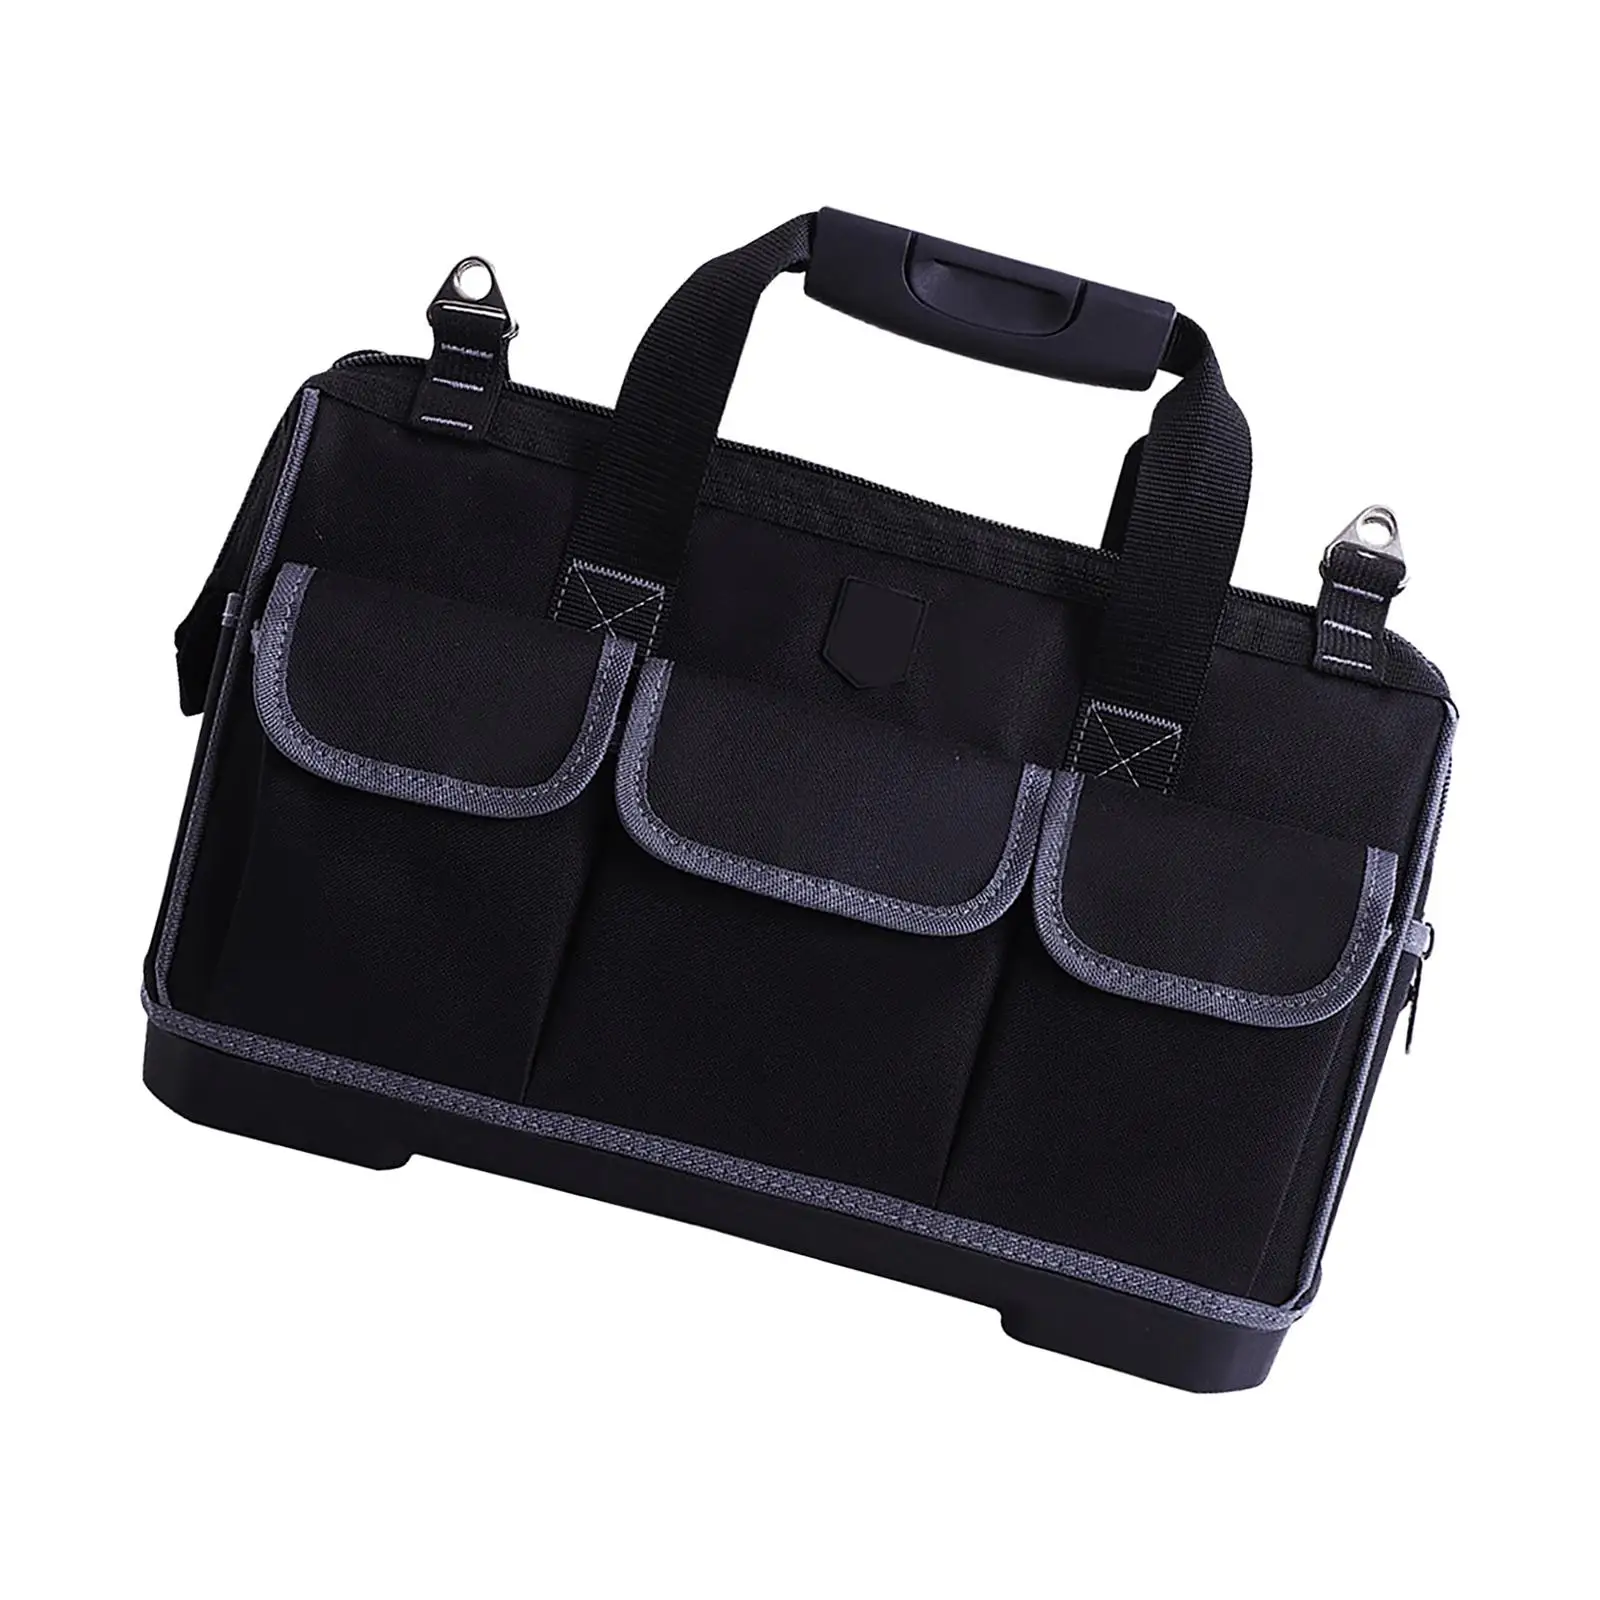 Portable Tool Bag Large Capacity Working Tool Bag for Mechanical Essentials Camping Gear